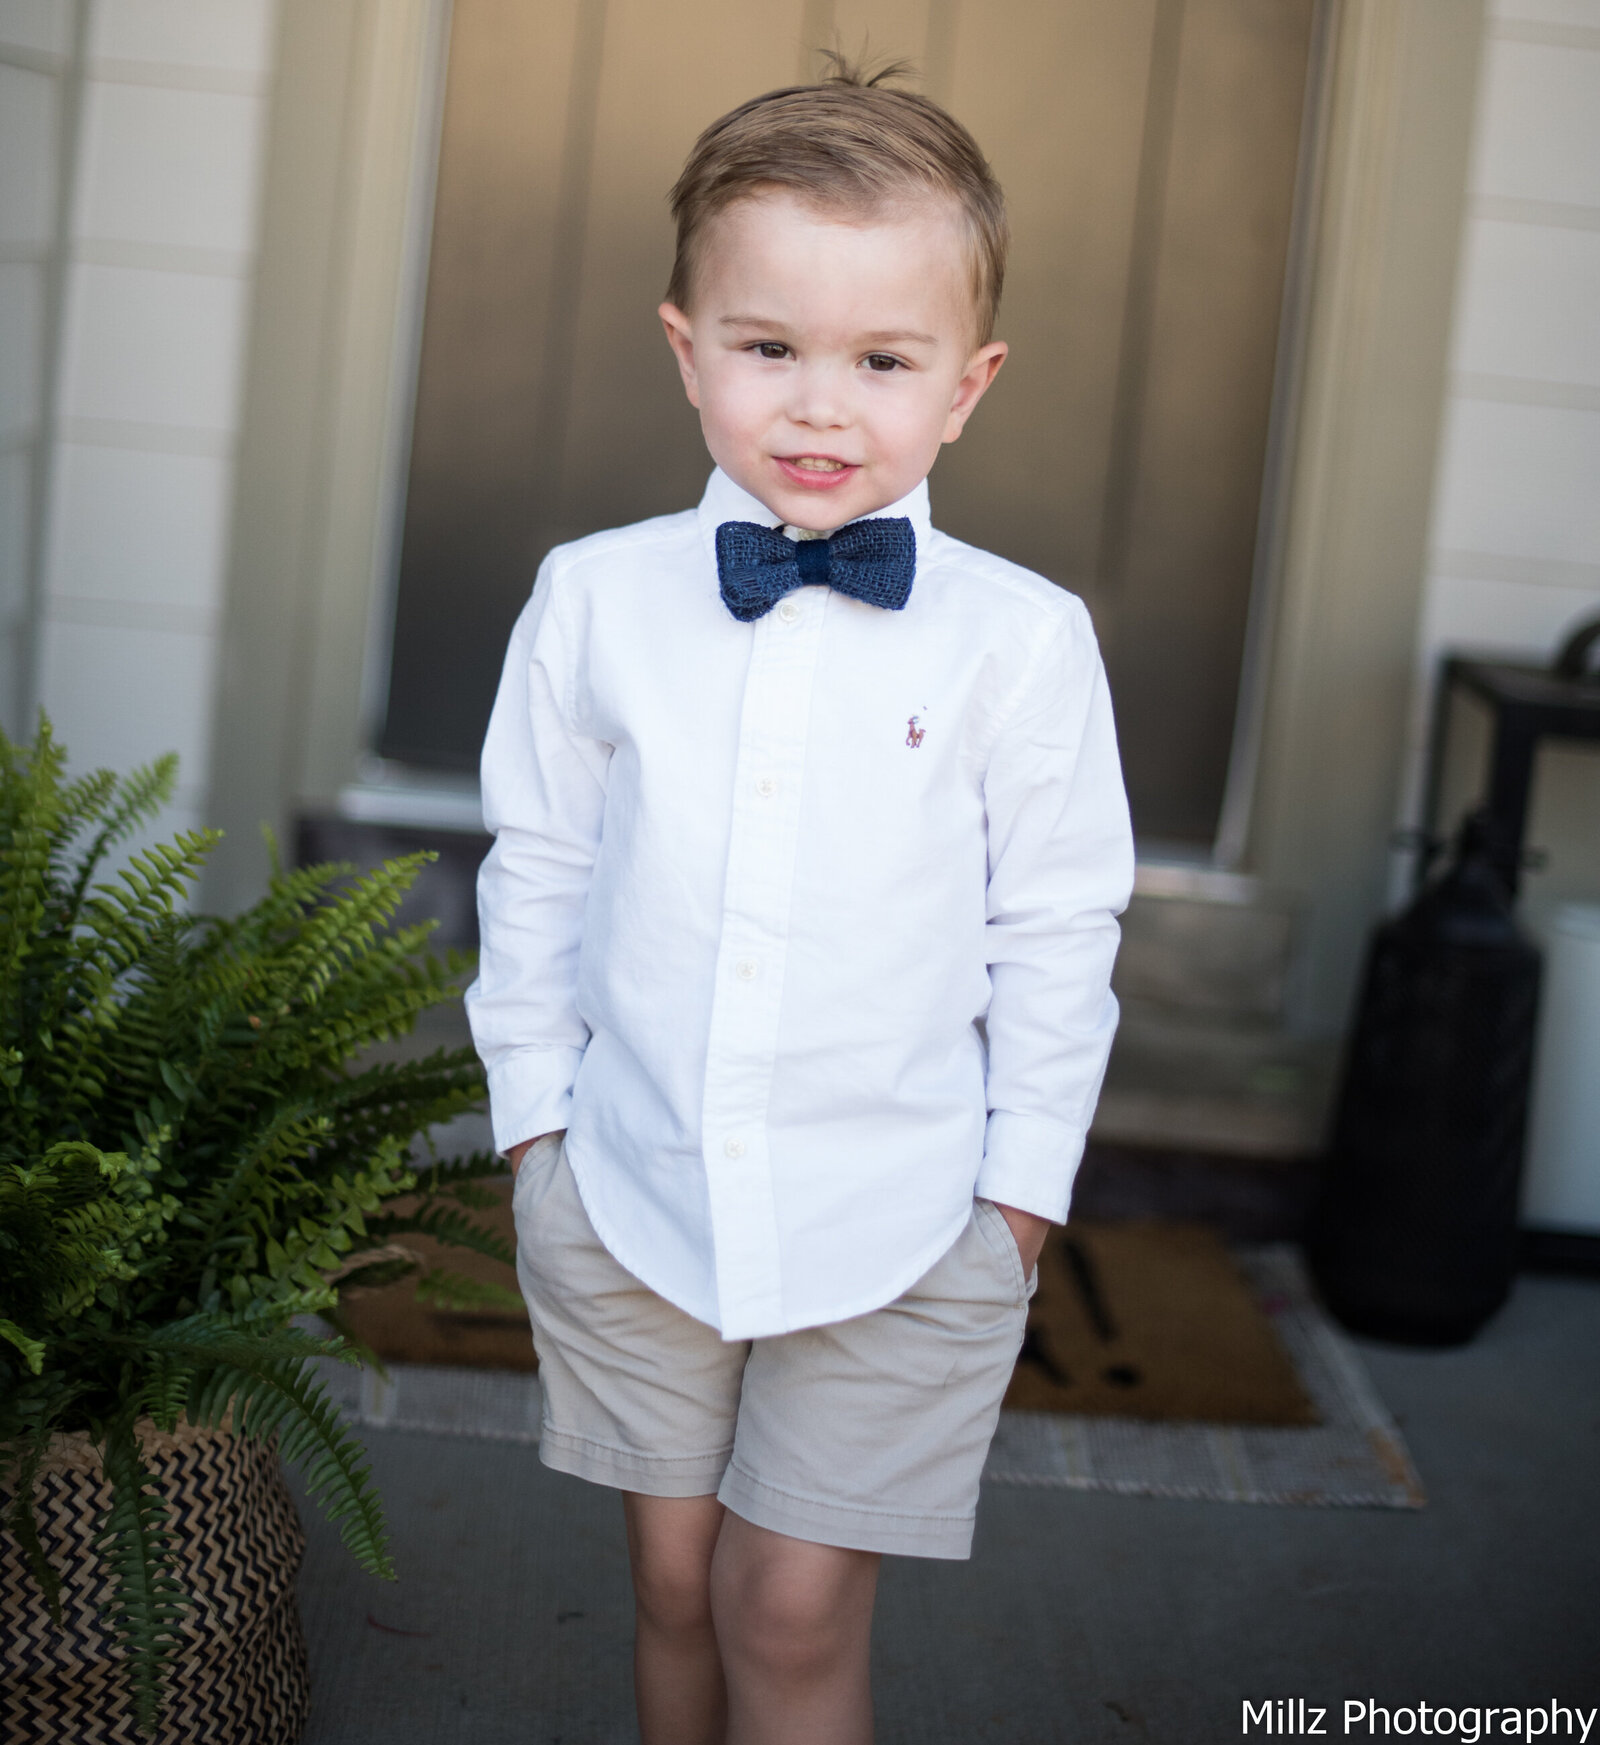 young boy in a dress shirt, bow tie, and shorts smiling for the camera photographed by Millz Photography in Greenville, SC